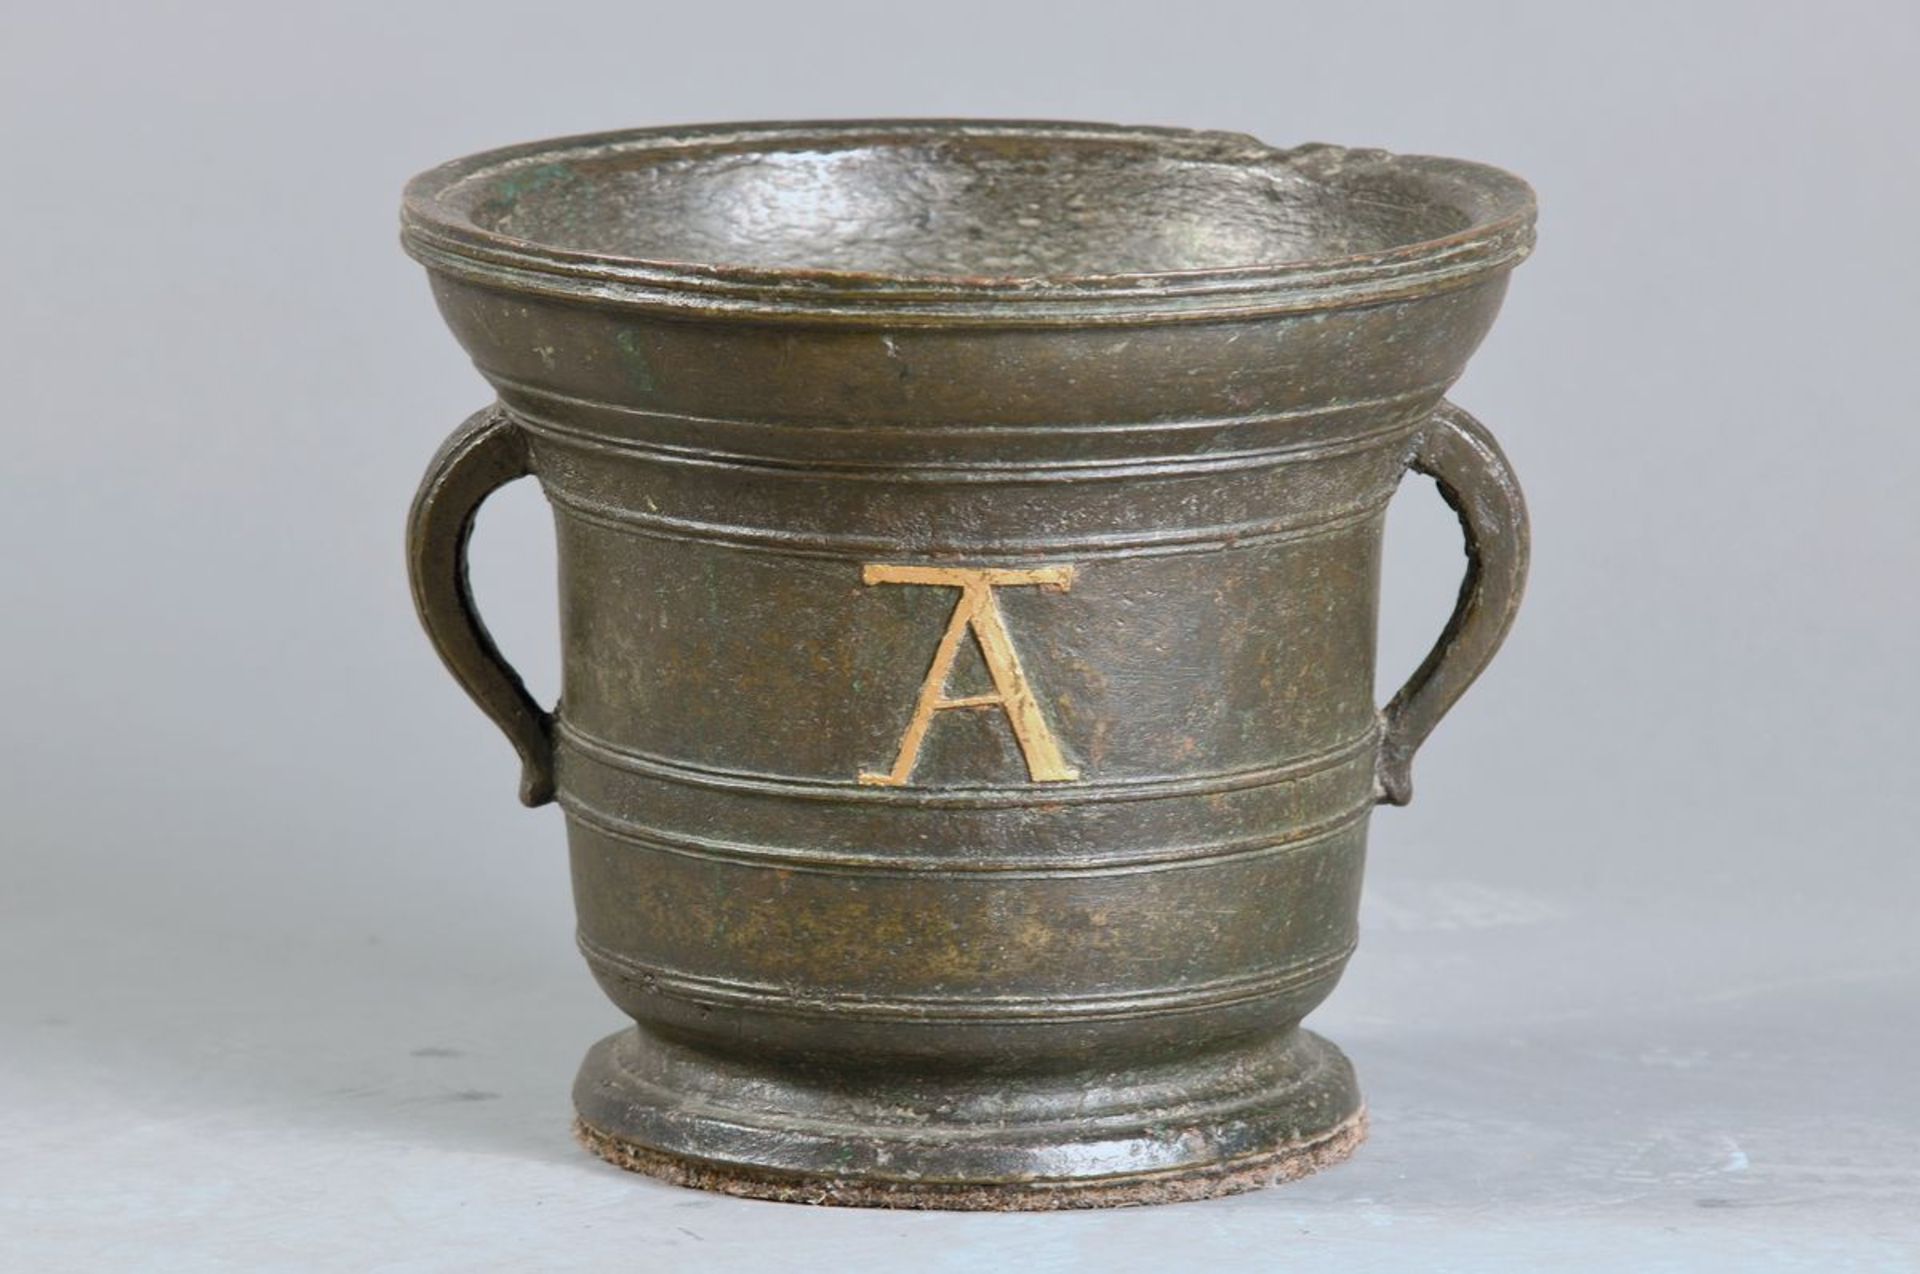 Large Mortar, Italy, 1534, bell bronce, dated AD MDXXXIV (1534), with monogram A, two handles,